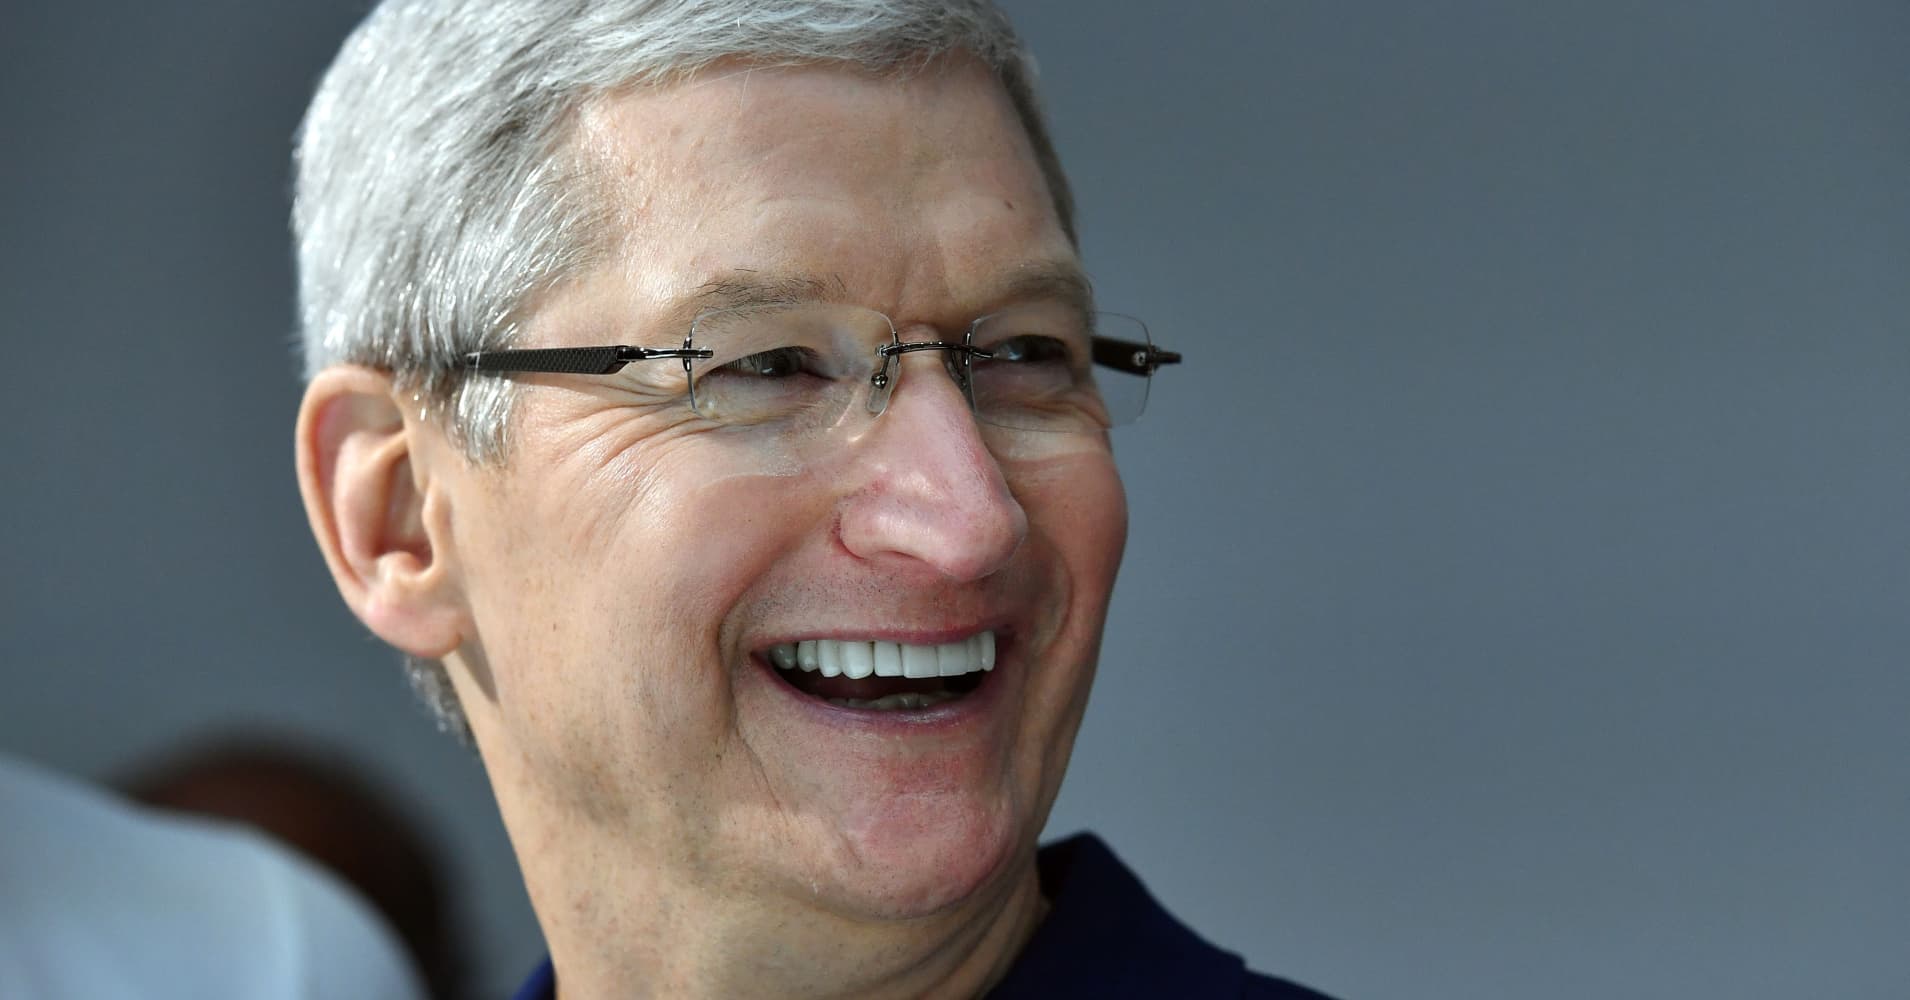 Apple made more profit in three months than Amazon has generated in its lifetime